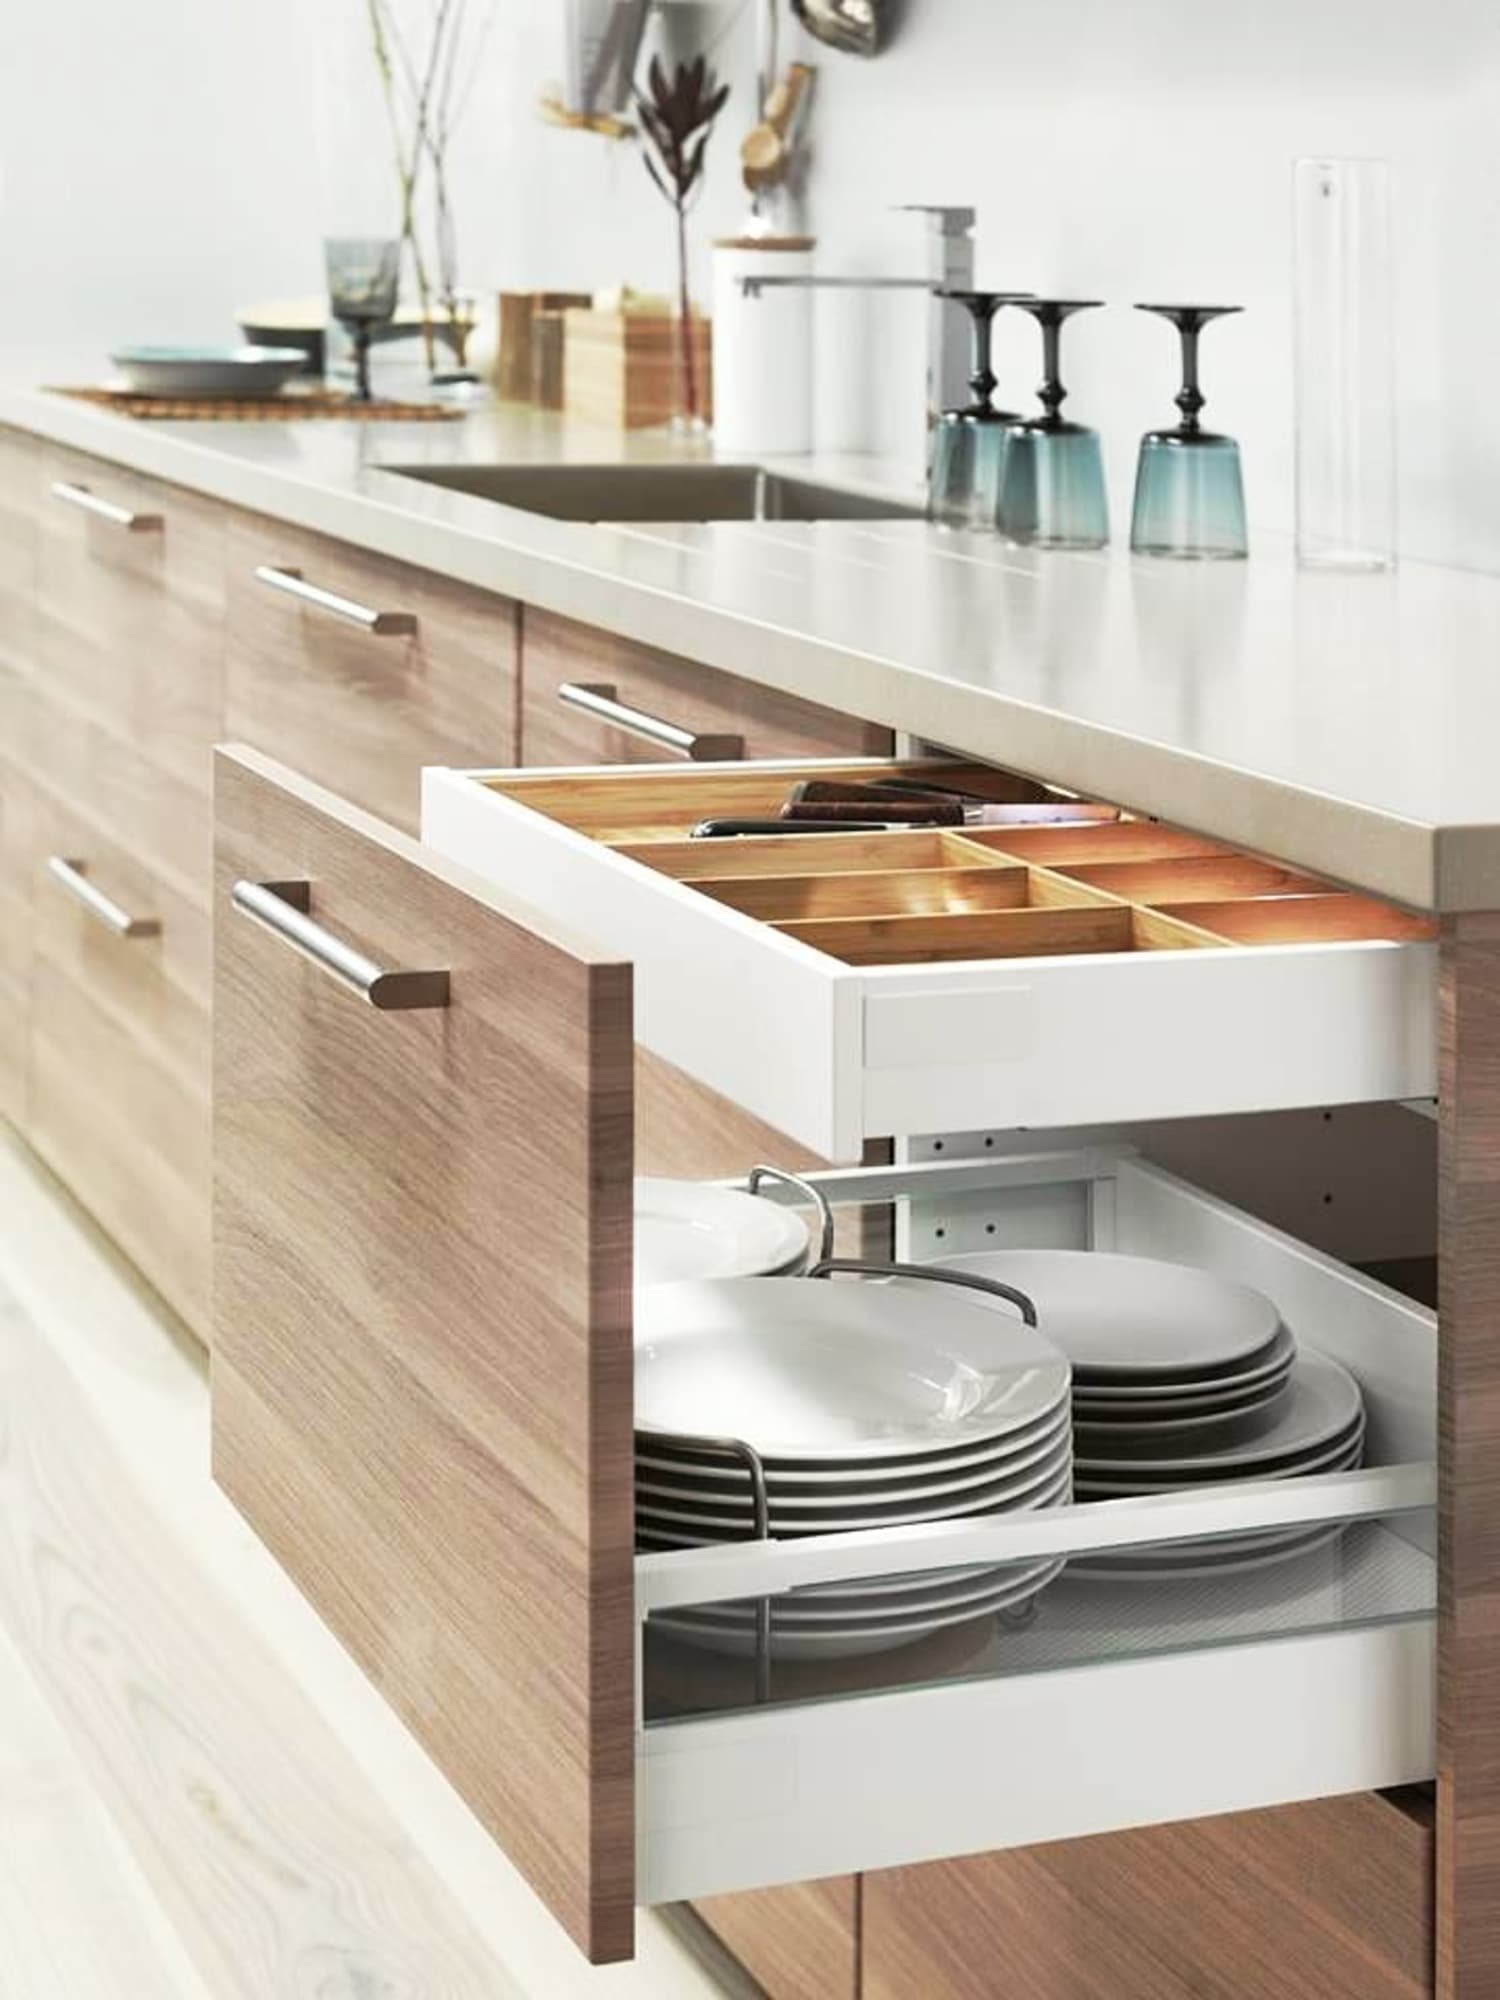 ikea is totally changing their kitchen cabinet system